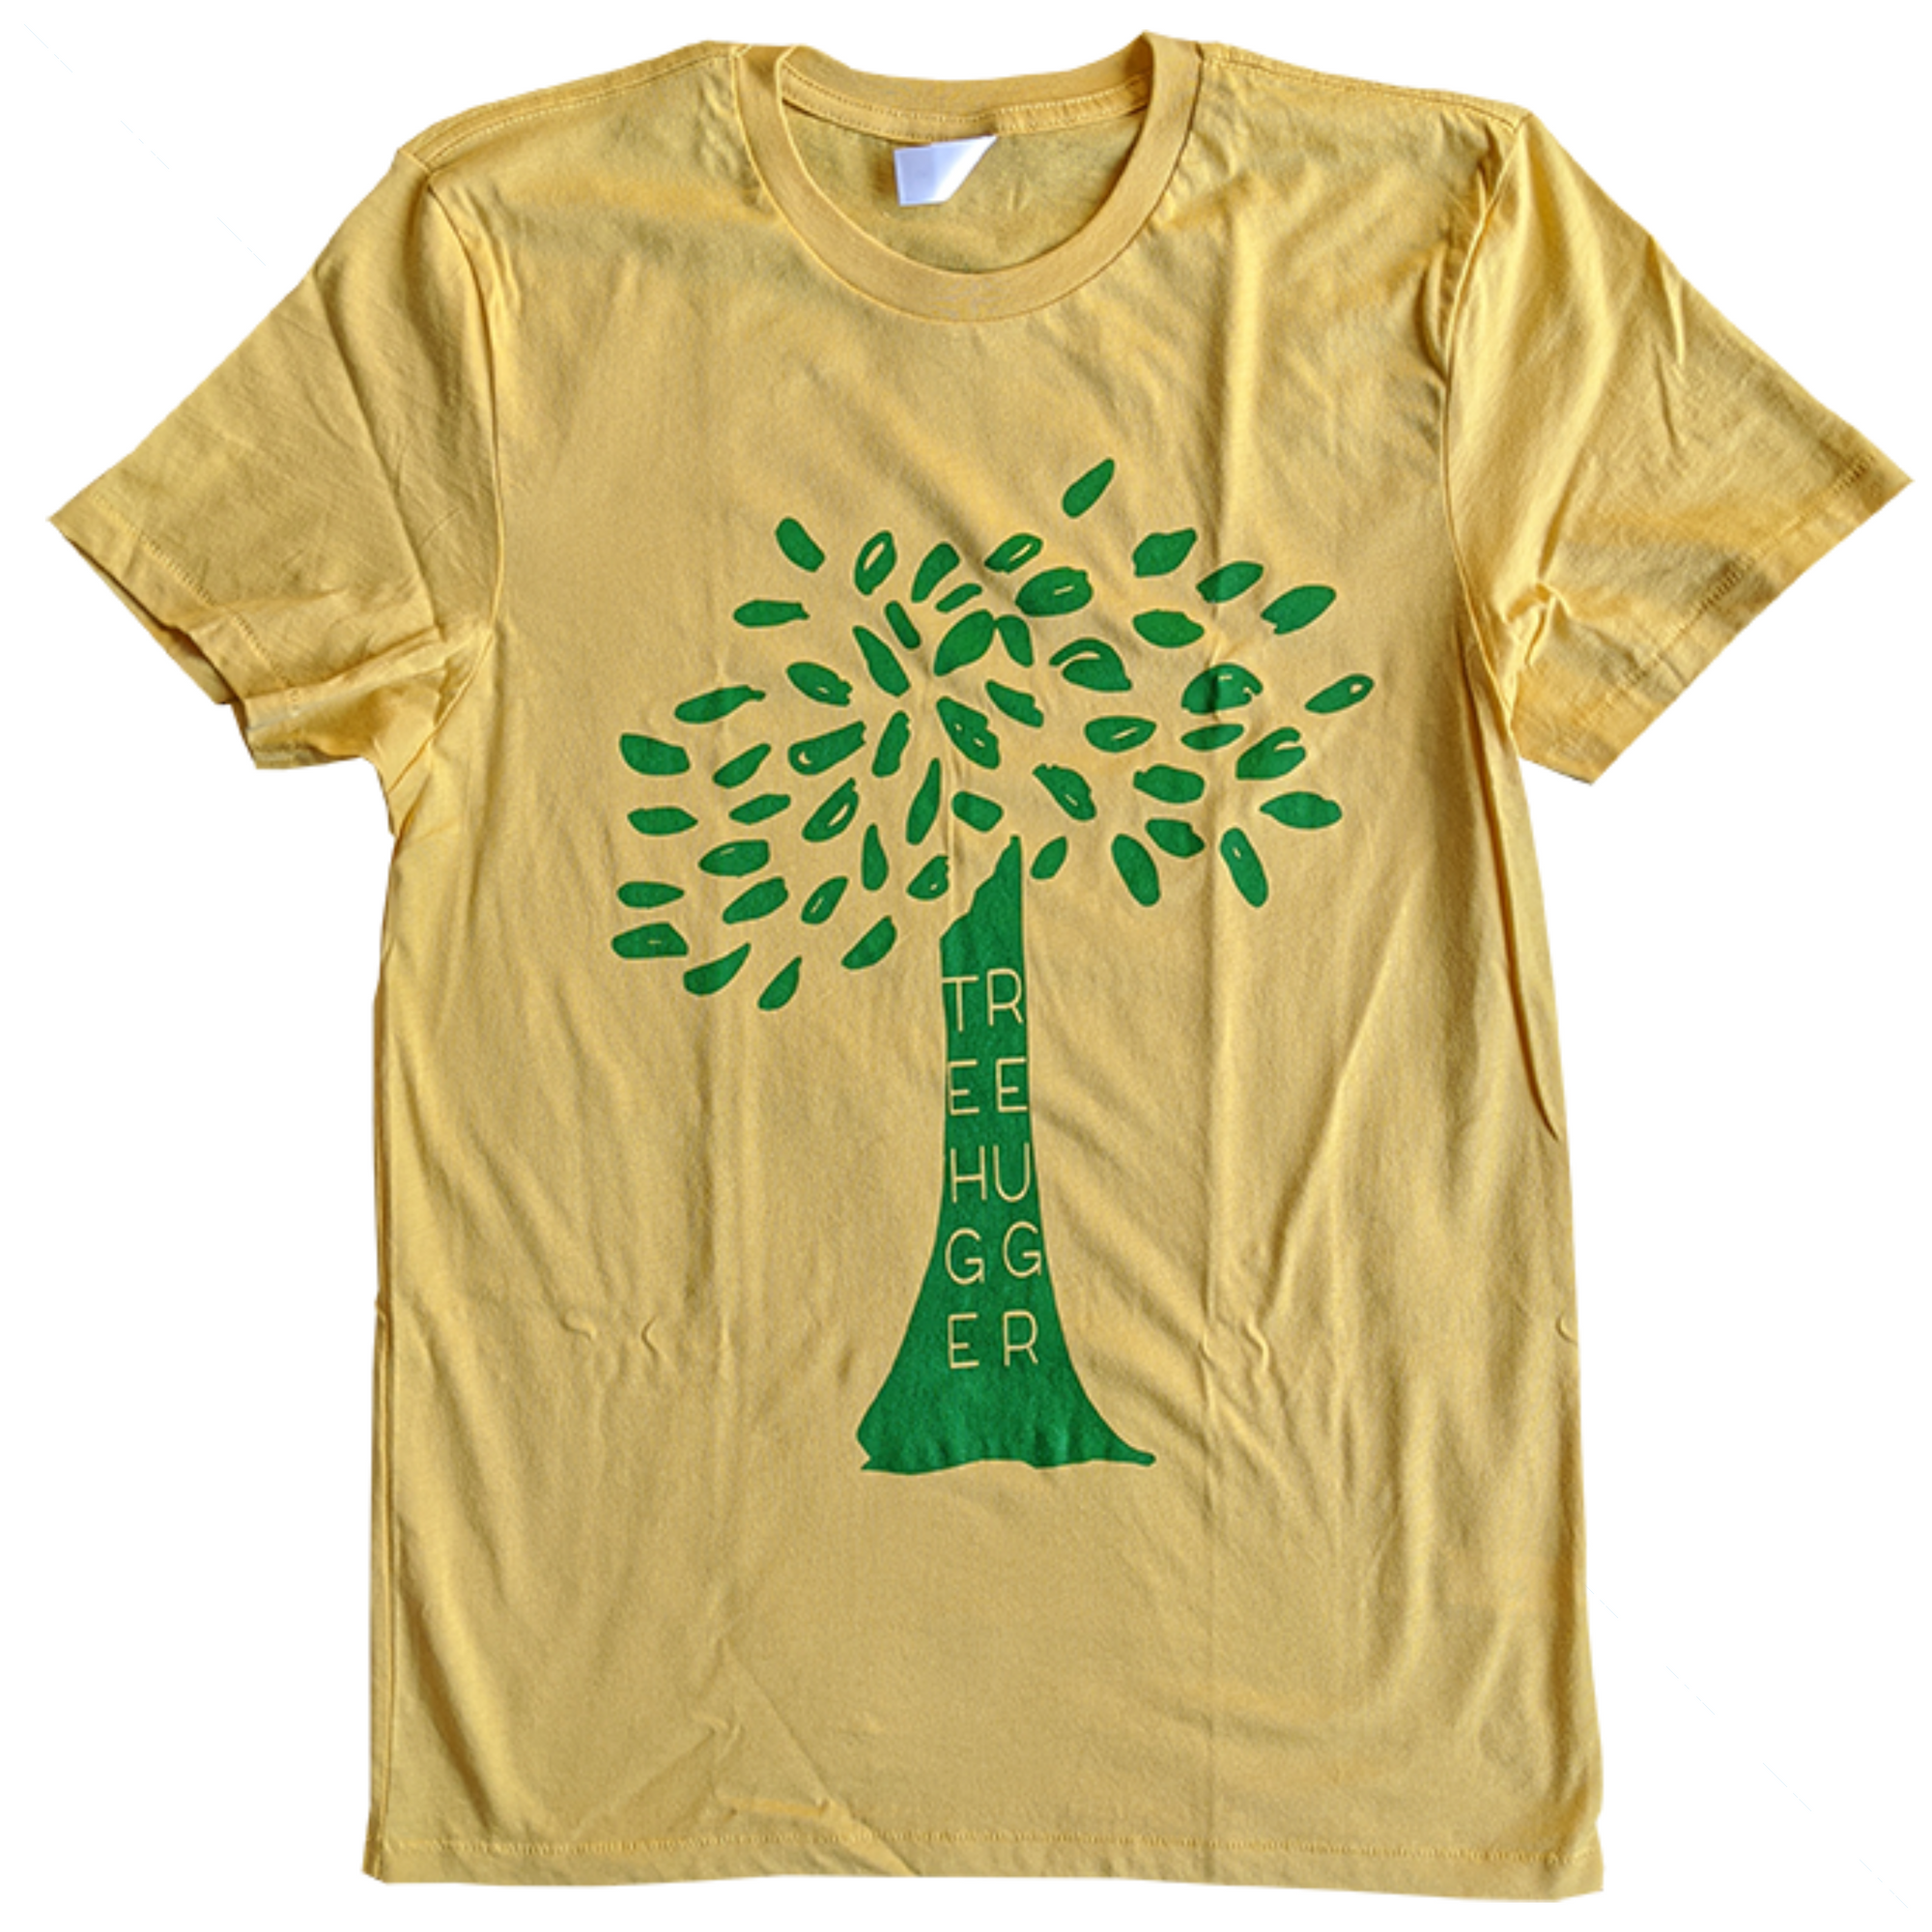 Treehugger - GreenHive Collective - ECO-FRIENDLY APPAREL